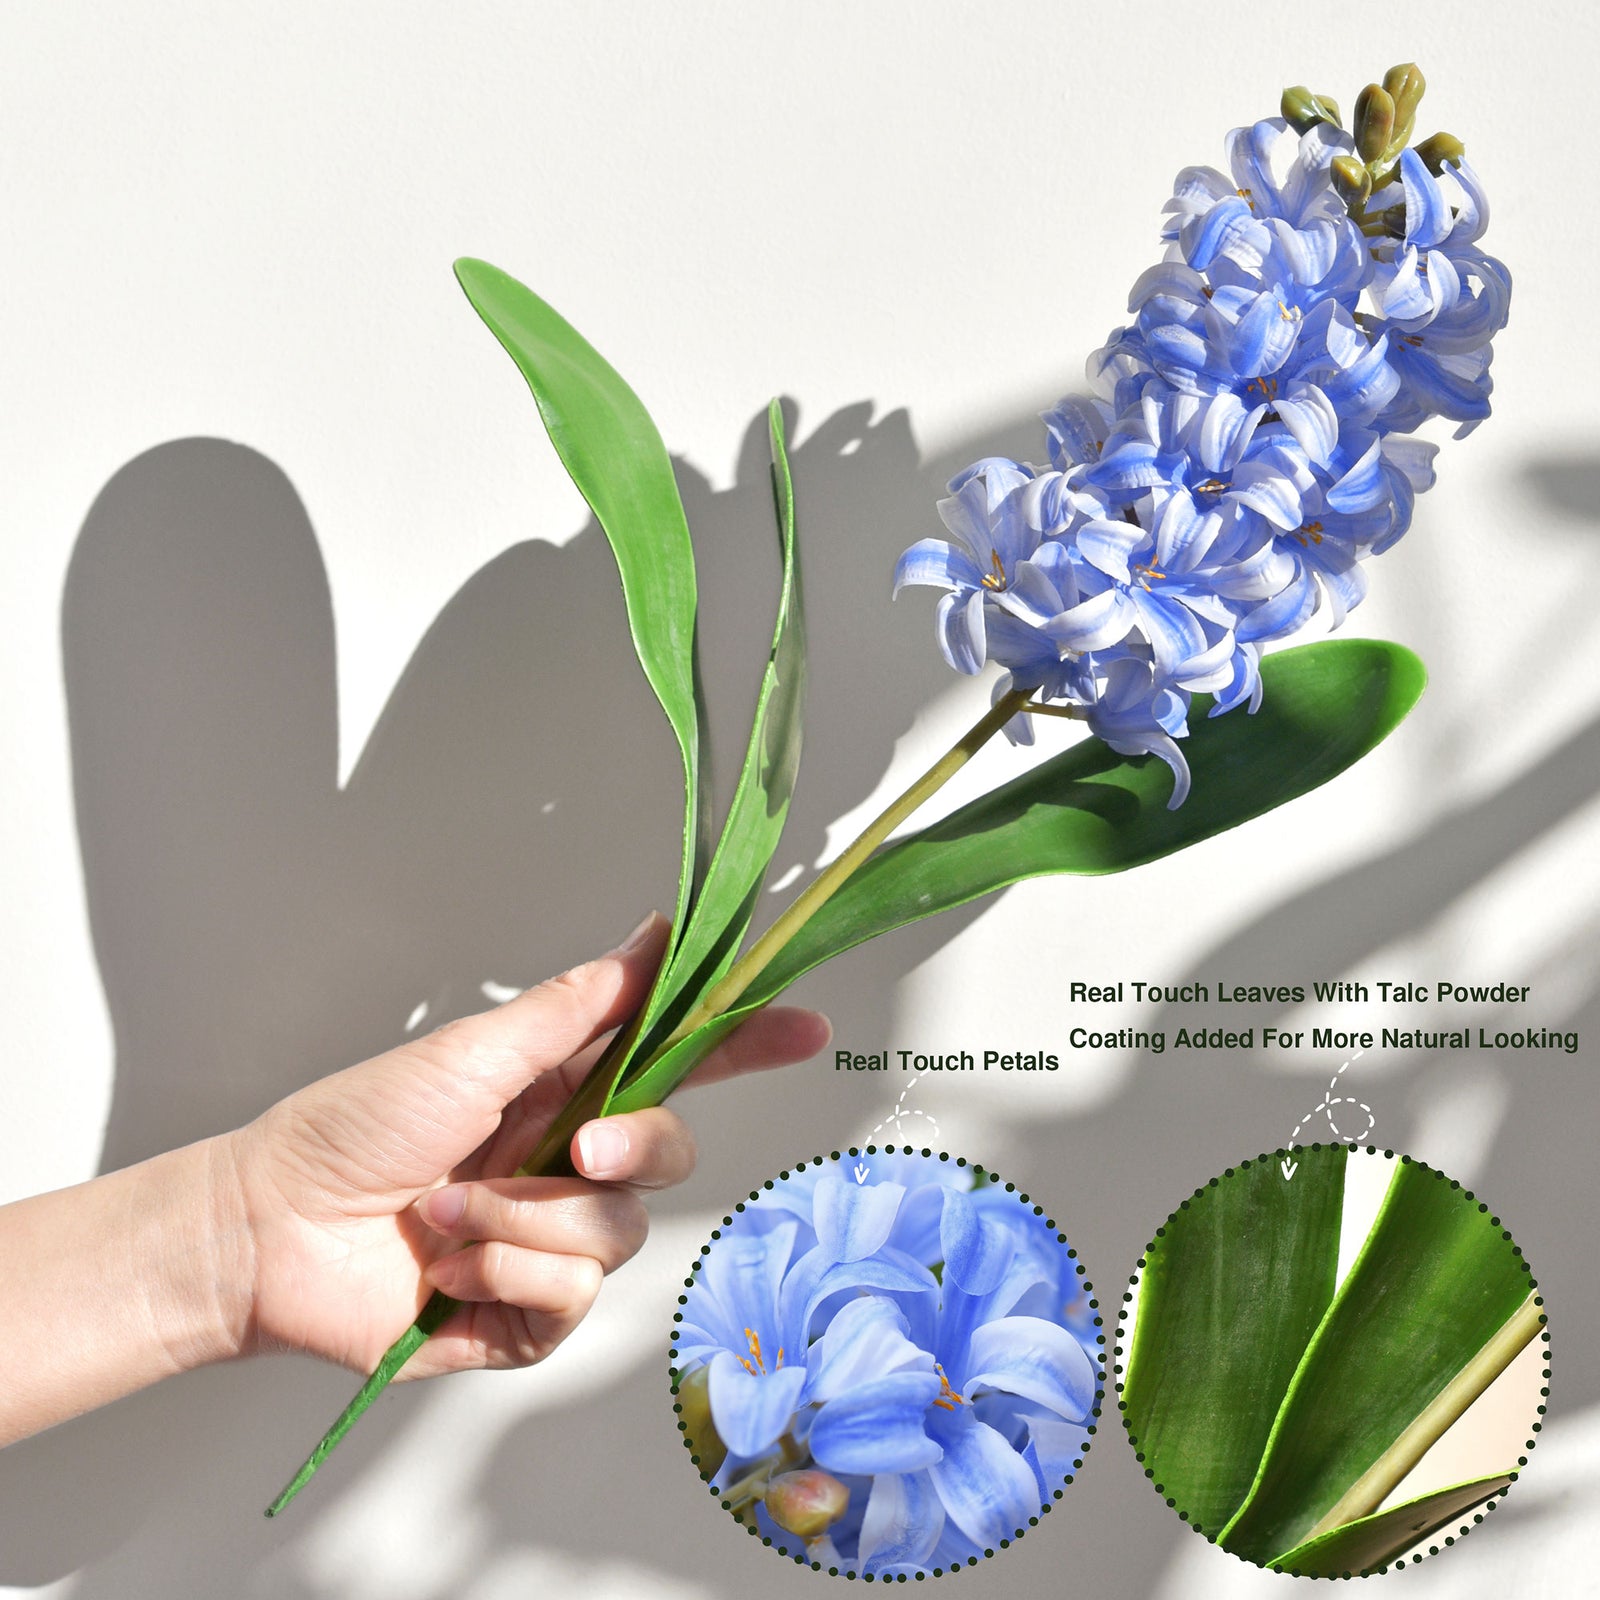 Real Touch Hyacinth (Tranquil Blue) Artificial Flowers ‘Petals Feel and Look like Fresh Hyacinth' Wedding, Home Decor, Arrangement 2 Stems